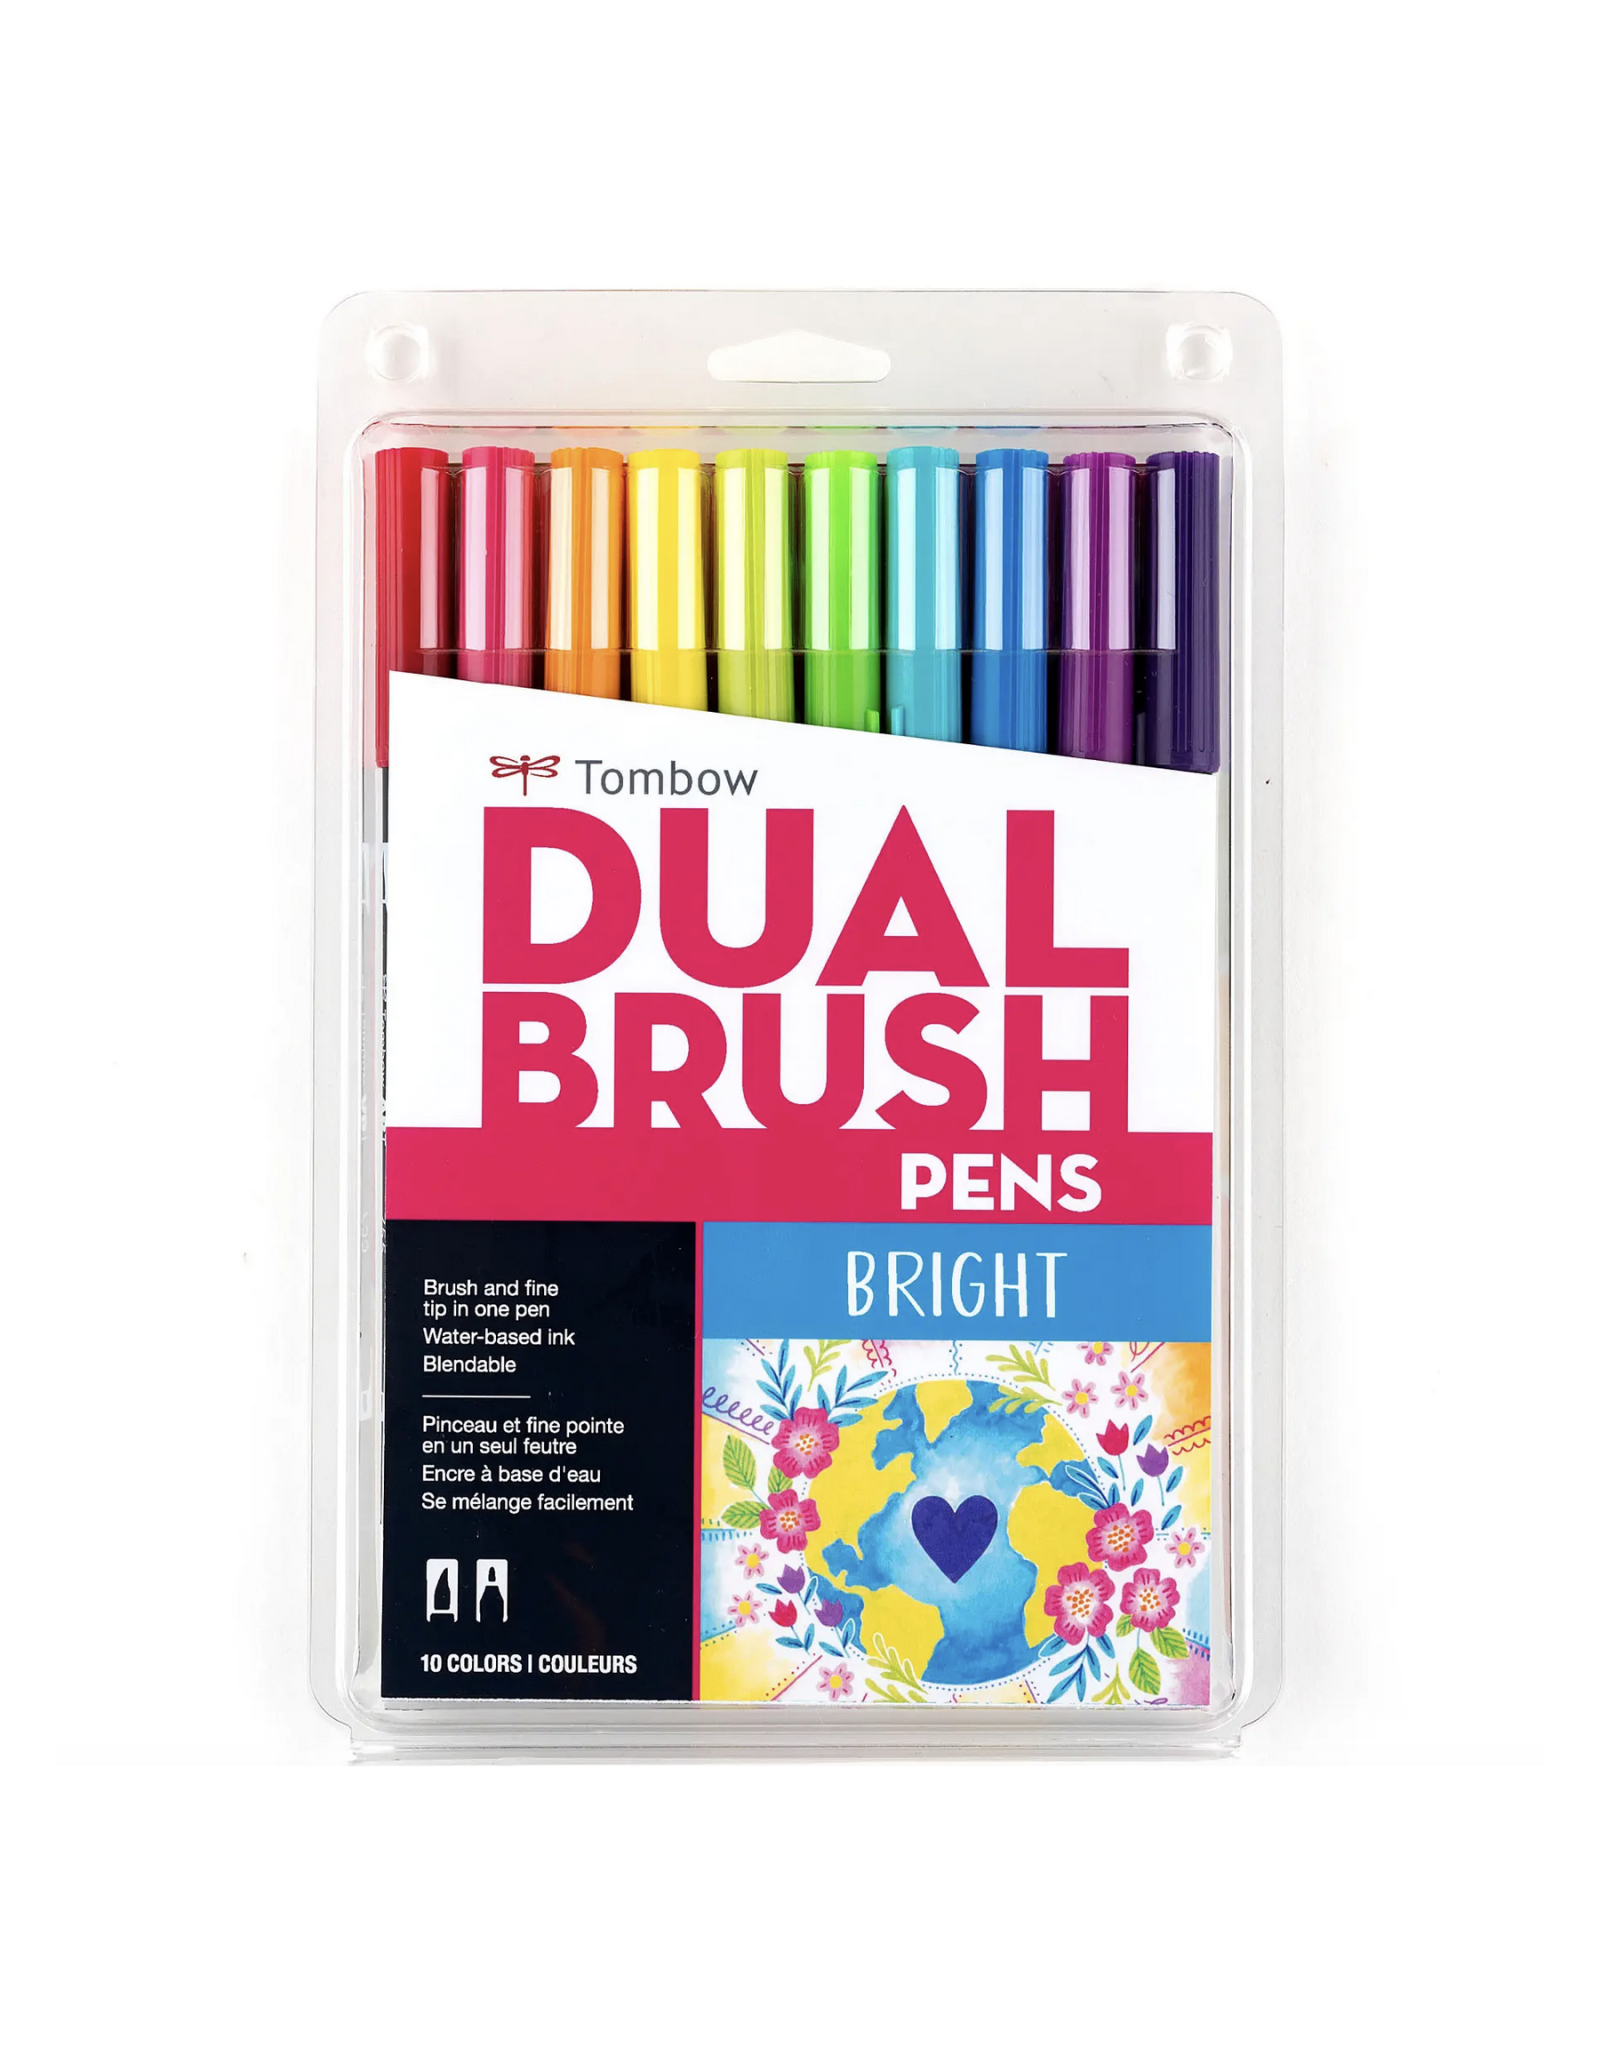 25 Dual Tip Bonus Pack - Watercolor Brush Penswith Real Bristle Brushes and  Fine Tips combined in Each Brush Pen plus a Premium Water Brush by ArtShip